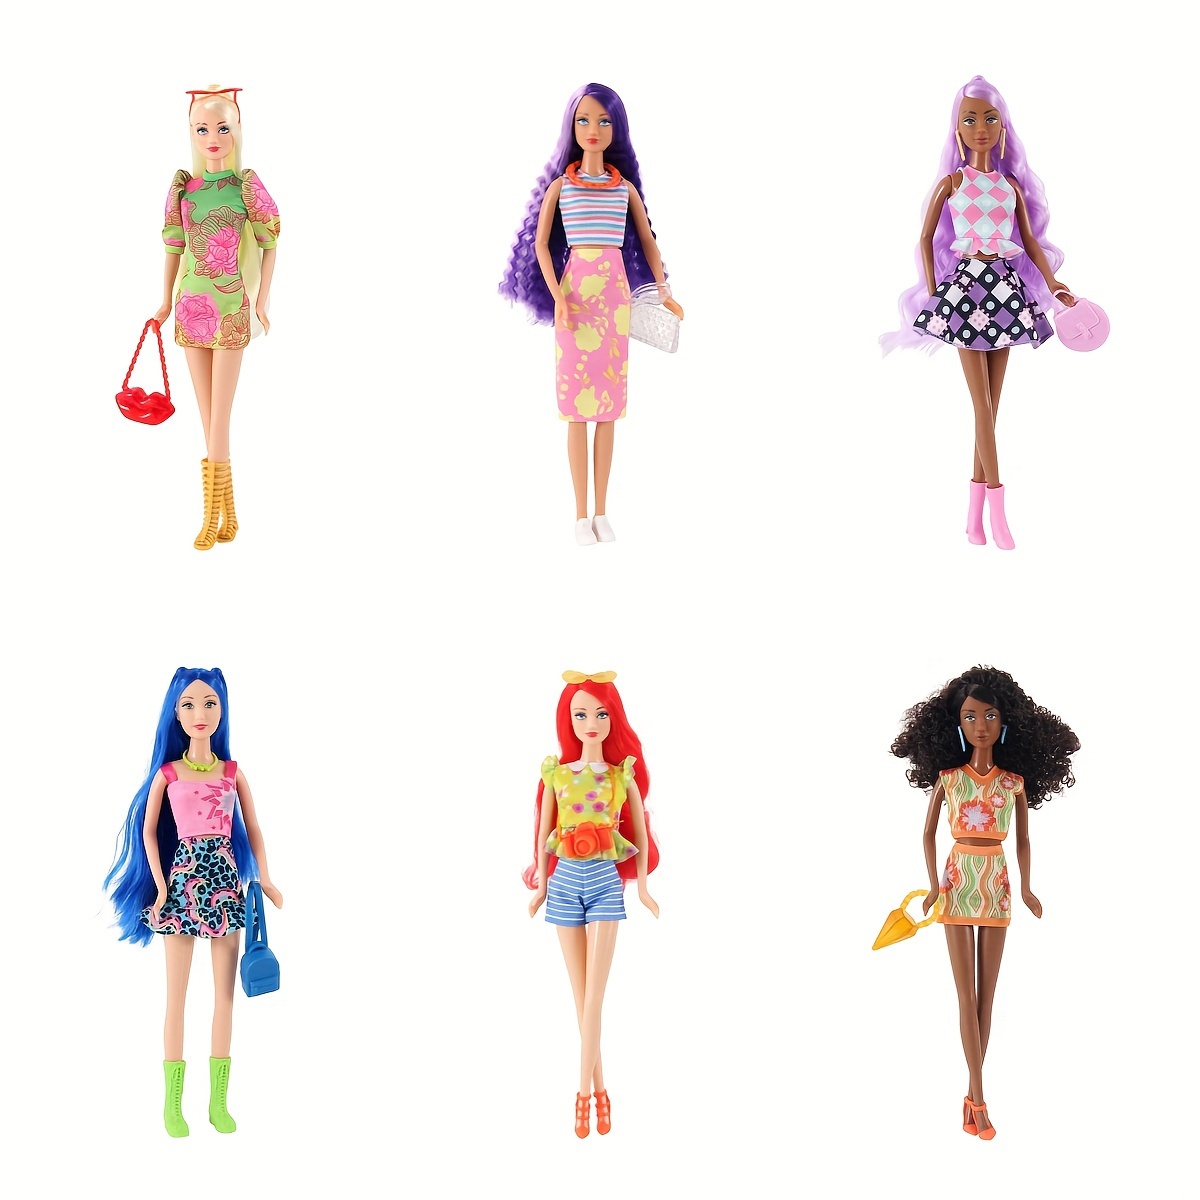  Colorful Doll Underwell Set Clothes Barbie Underpants -  Suitable for 11.5 inch Barbie Doll Accessories Solid Print Stripes Random  30 Pieces : Toys & Games